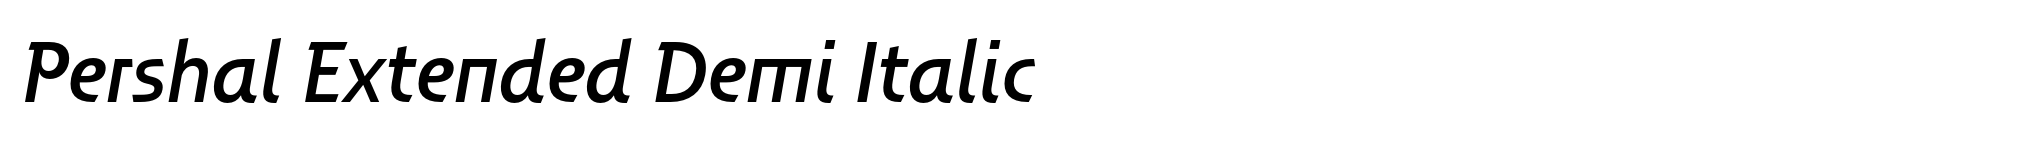 Pershal Extended Demi Italic image